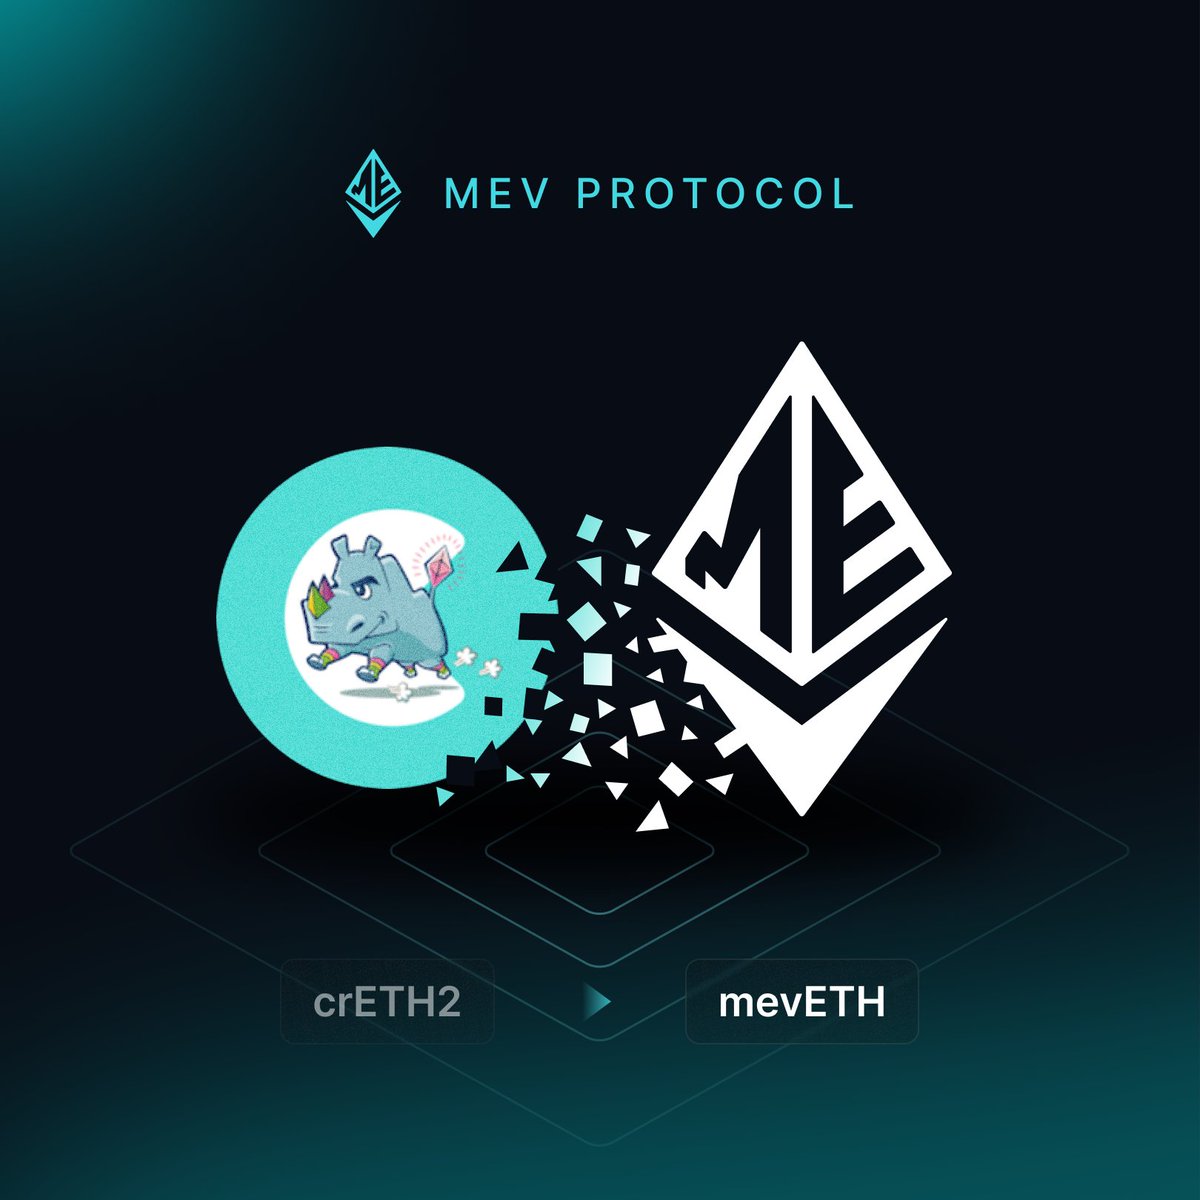 With the launch of MEV Protocol and mevETH, @CreamdotFinance crETH2 holders can now migrate to mevETH! Over 11,000 crETH2 have already migrated! If you haven’t yet, read on for the why and how: